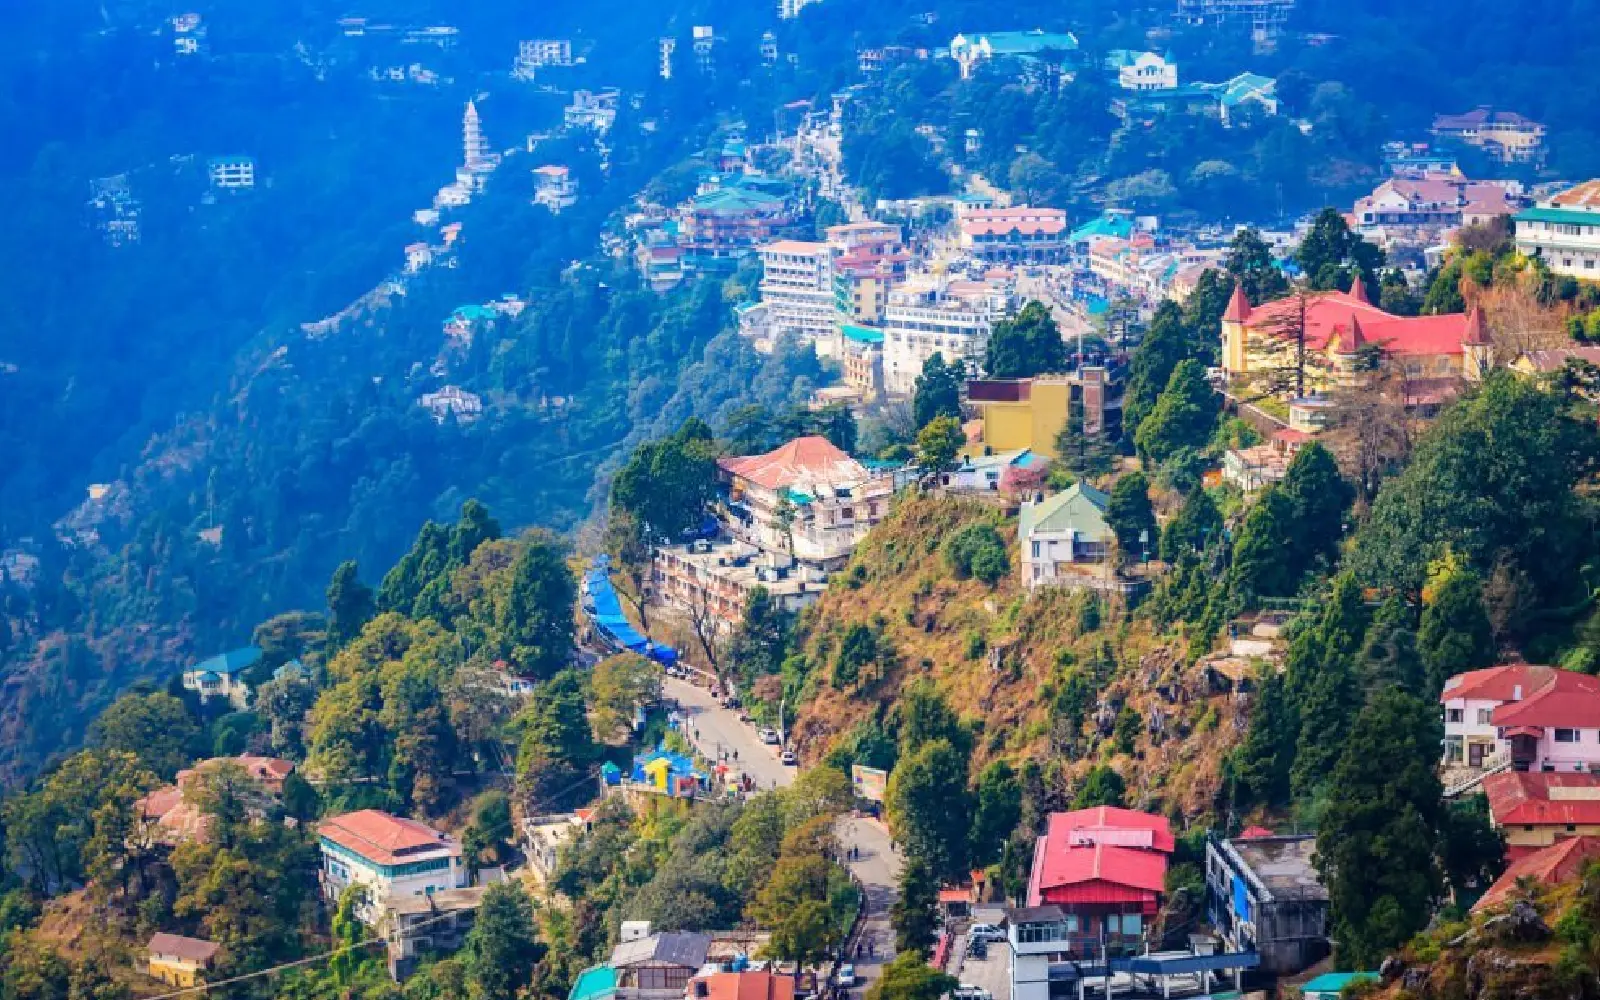 PLACES TO VISIT IN MUSSOORIE